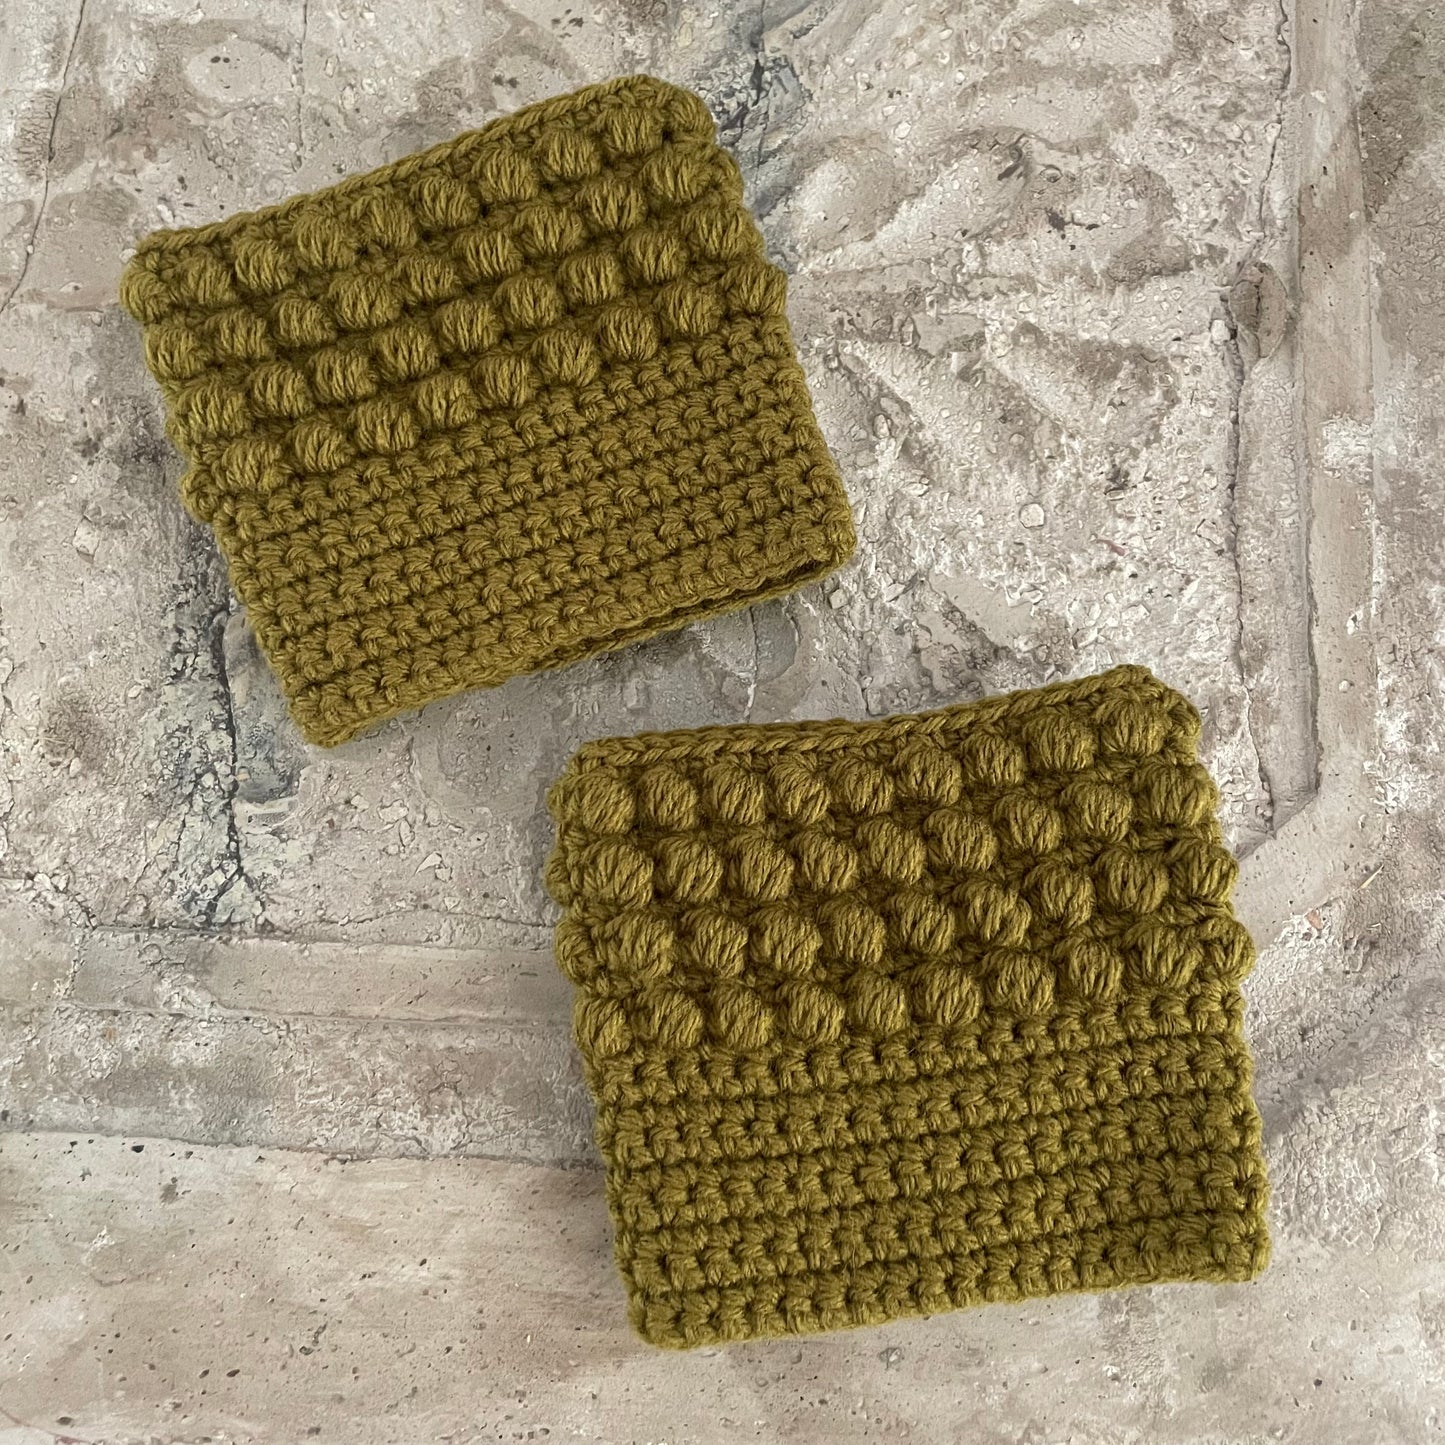 Boot Cuffs in Olive Green Puff Stitch 12" Hand Crocheted Knit Fall Winter Hiking Indoor Outdoor Cozy